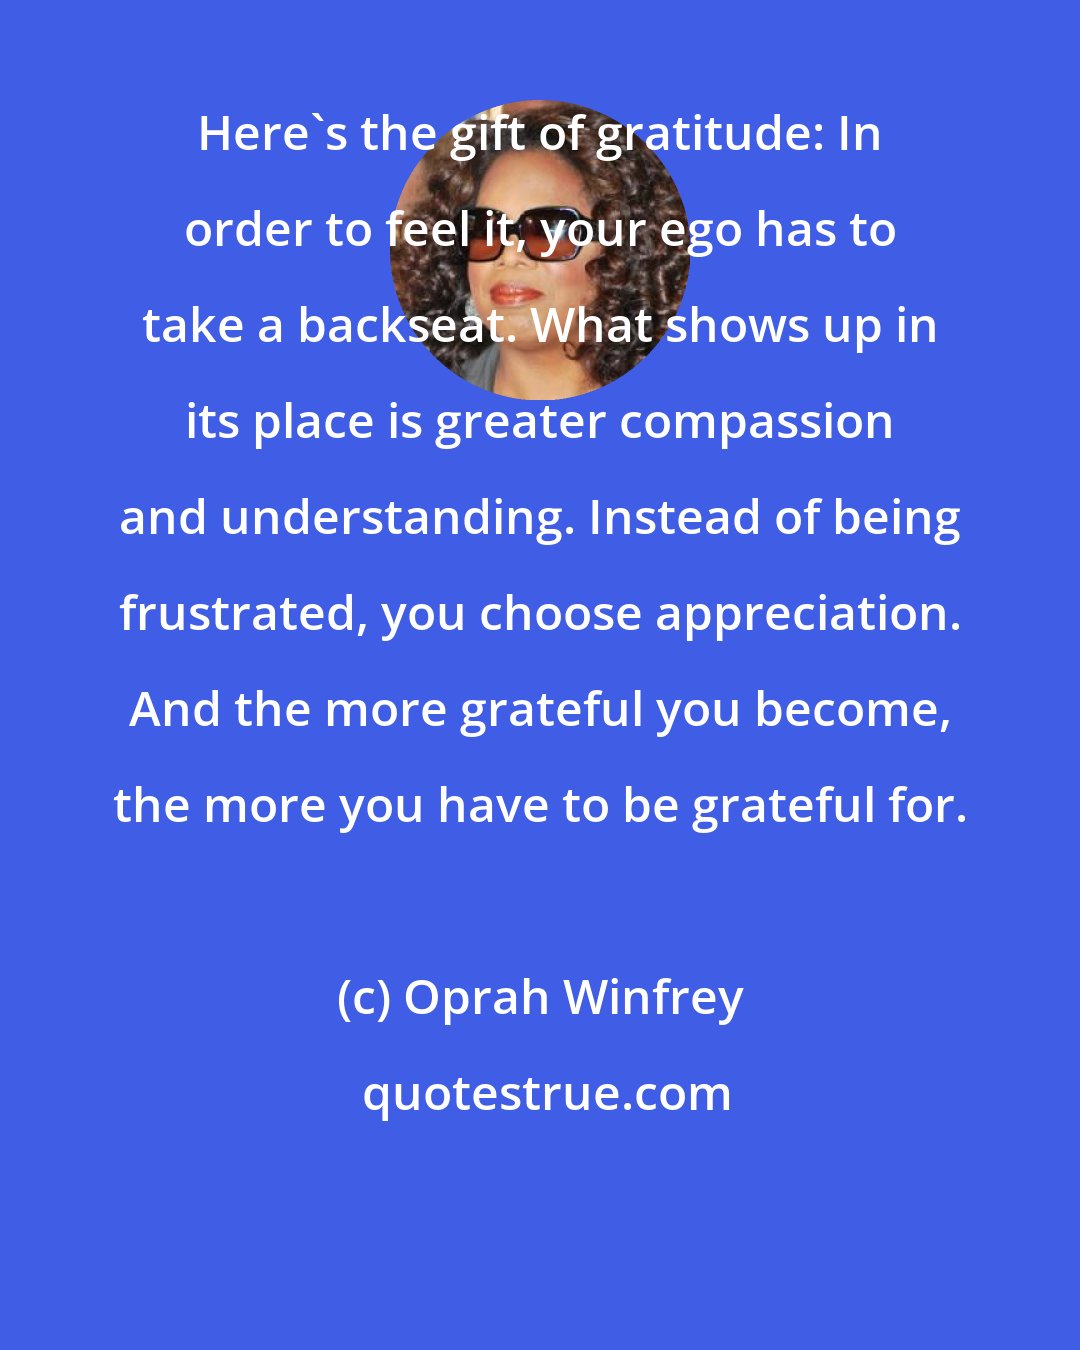 Oprah Winfrey: Here's the gift of gratitude: In order to feel it, your ego has to take a backseat. What shows up in its place is greater compassion and understanding. Instead of being frustrated, you choose appreciation. And the more grateful you become, the more you have to be grateful for.